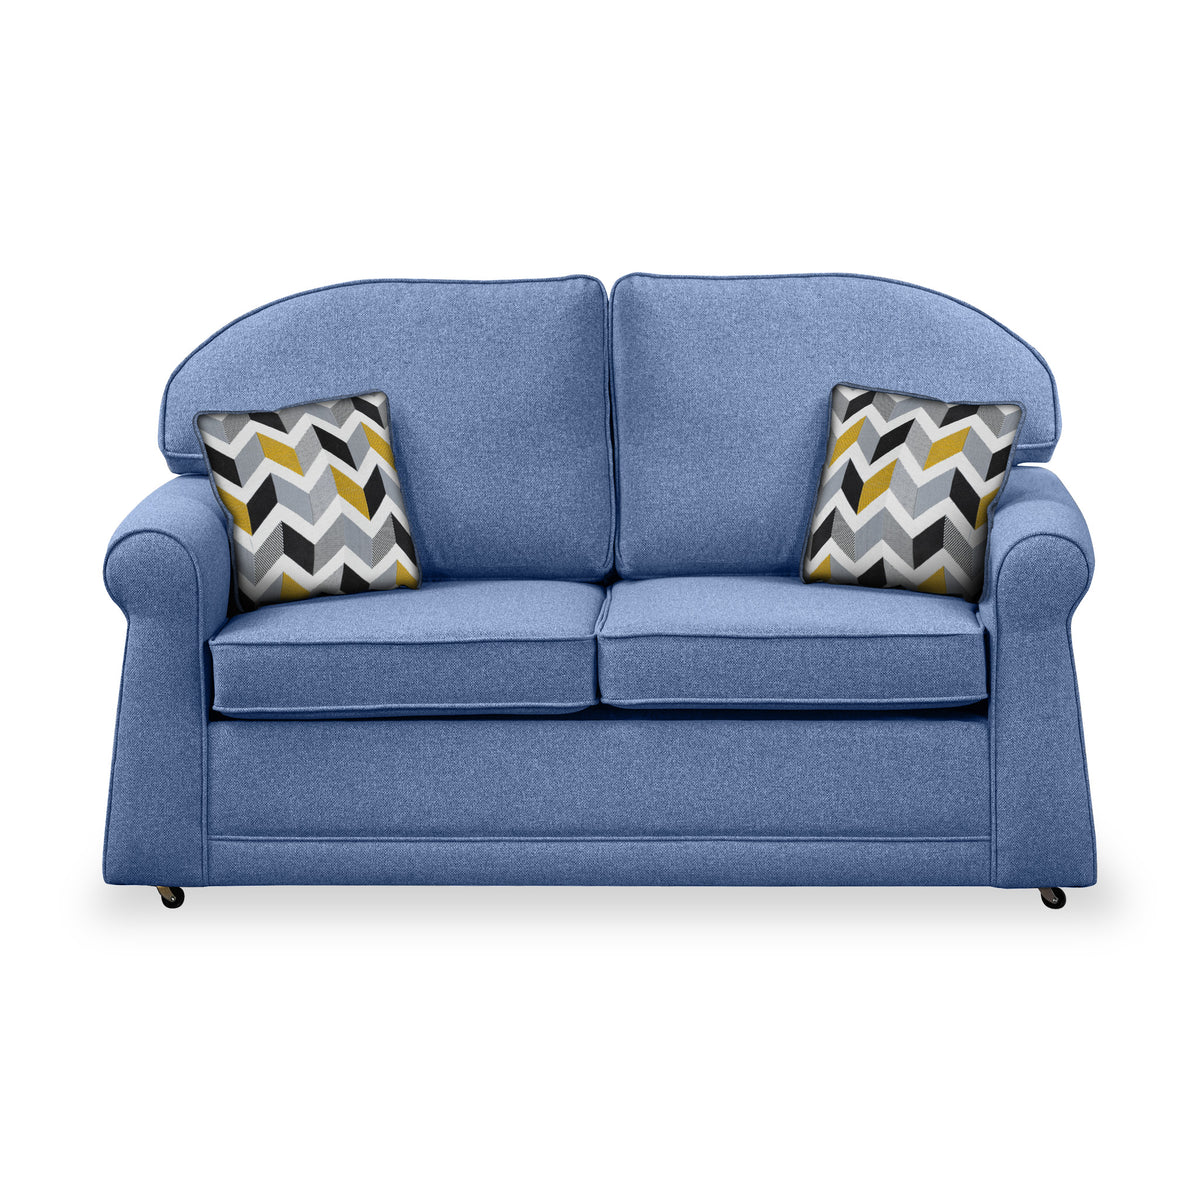 Croxdon Denim Faux Linen 2 Seater Sofabed with Mustard Scatter Cushions from Roseland Furniture